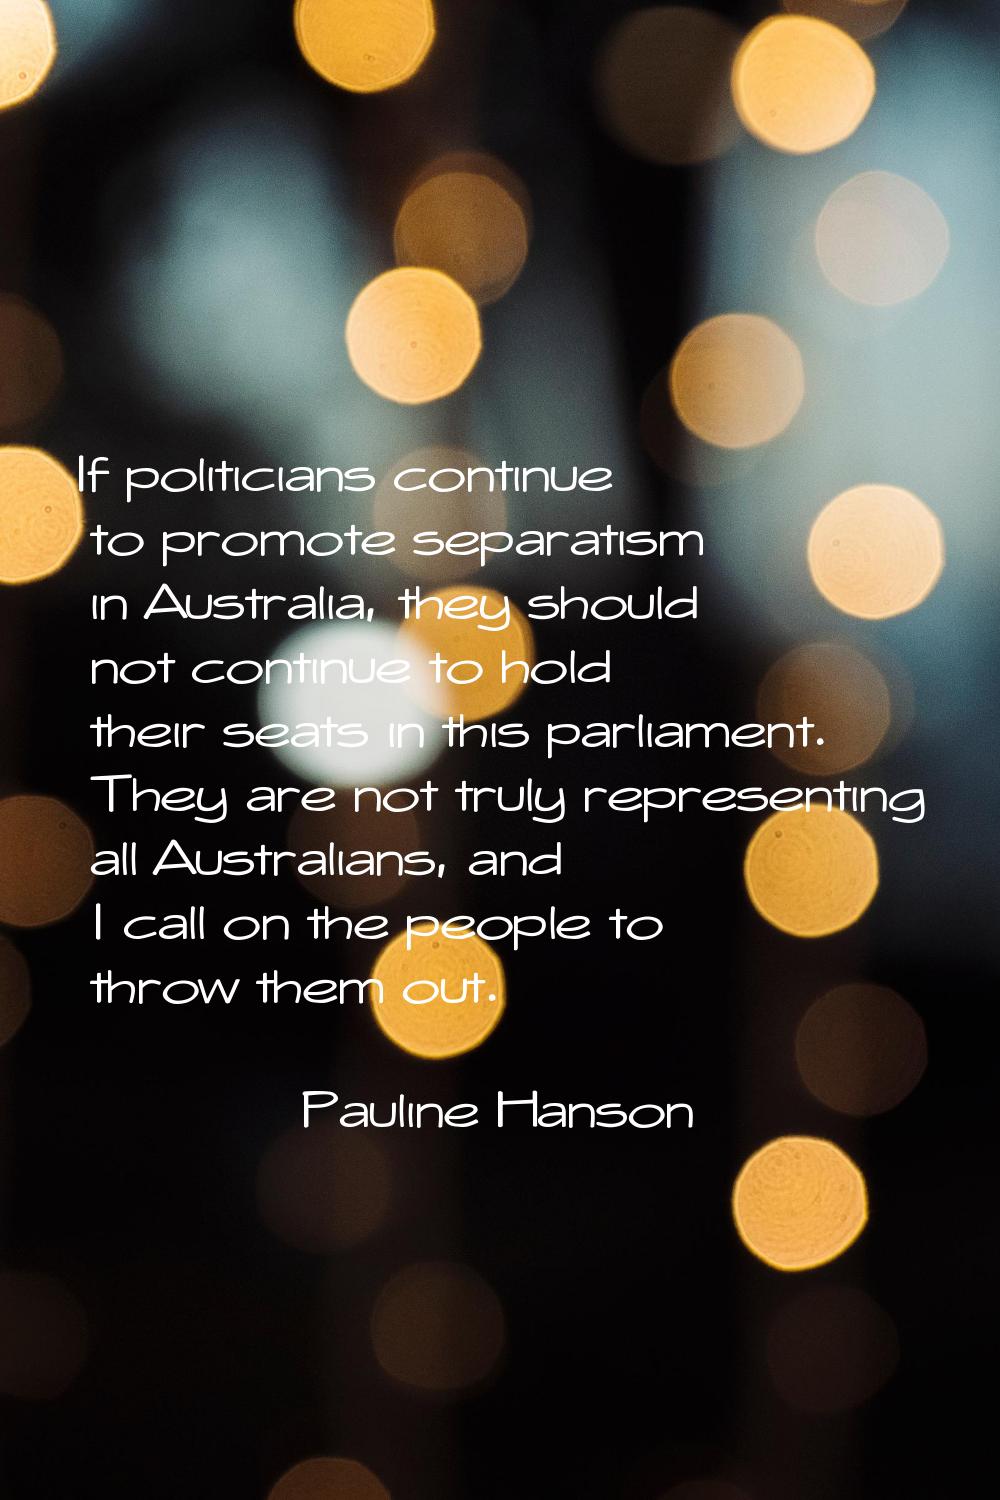 If politicians continue to promote separatism in Australia, they should not continue to hold their 